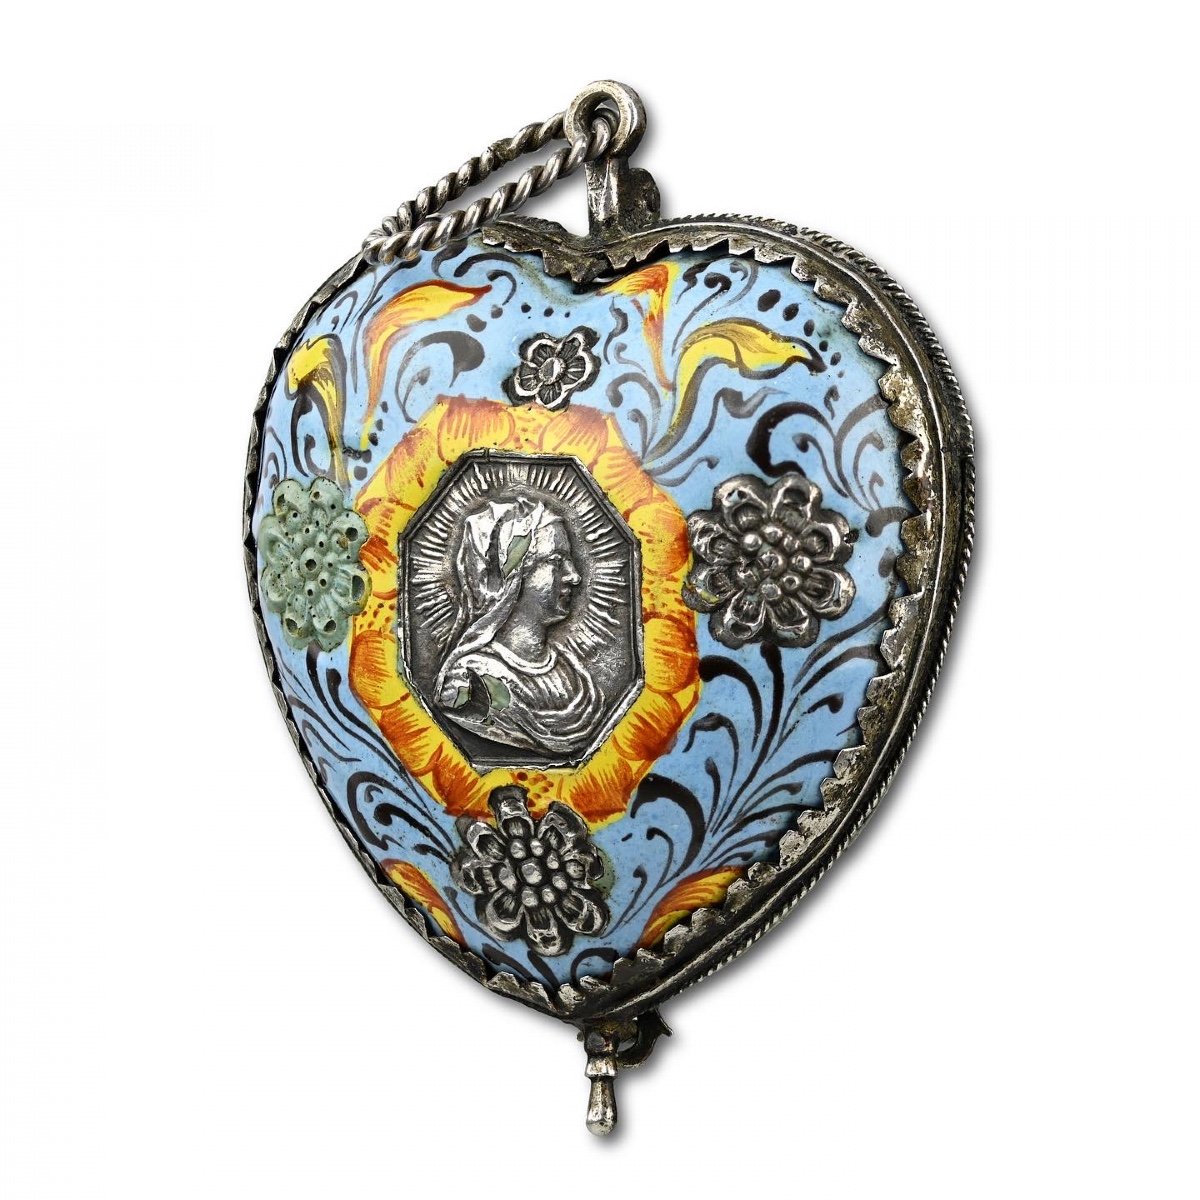 Silver And Enamelled Pendant In The Form Of A Heart. German, Late 17th Century.-photo-1